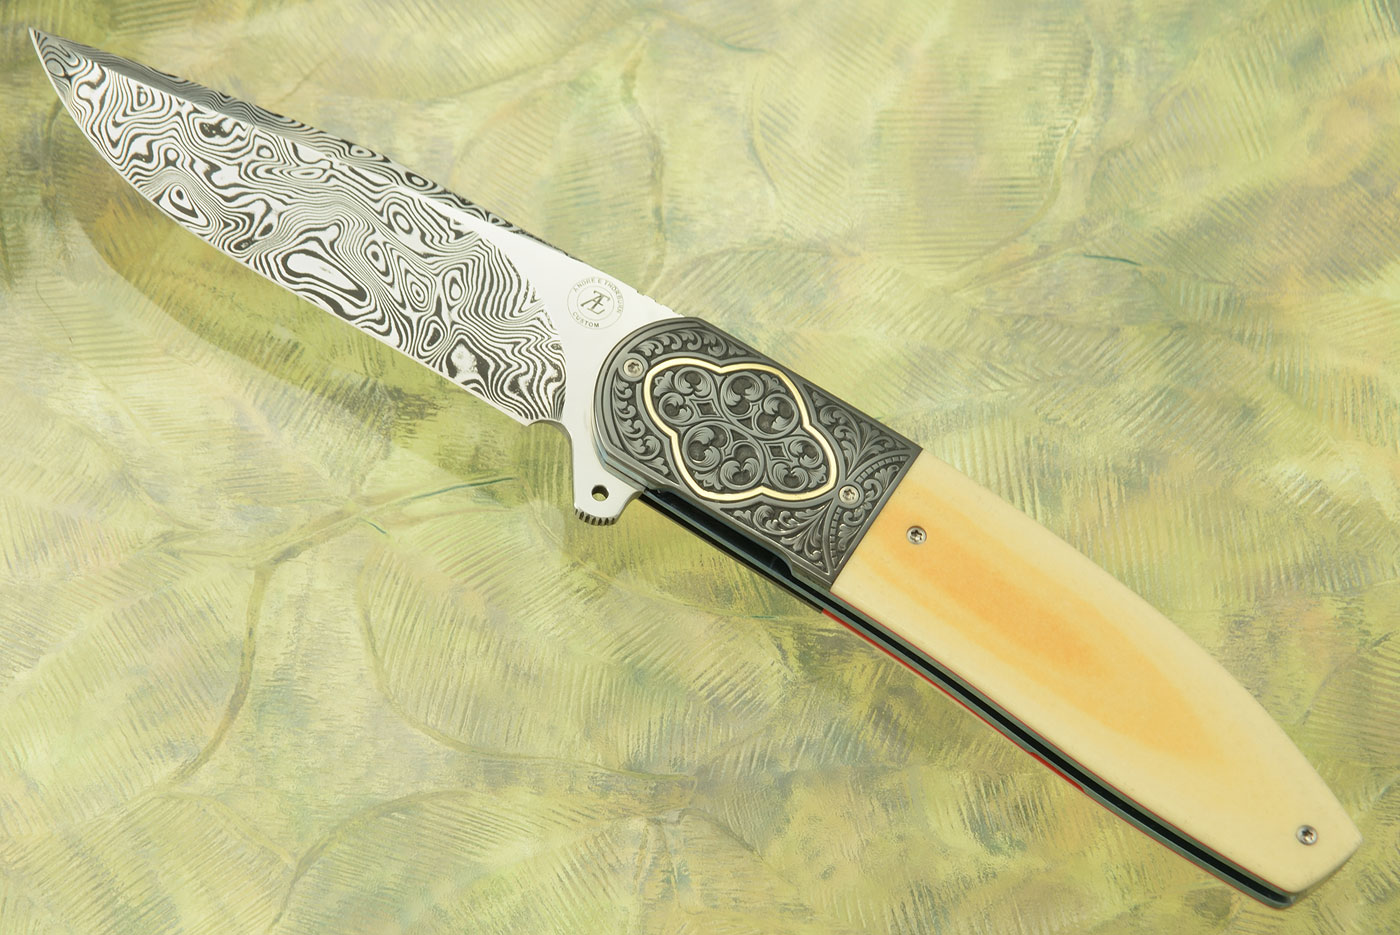 L28 Flipper with Antique Westinghouse Micarta, Damascus, and Engraved Zirconium with Gold Inlays (Ceramic IKBS)